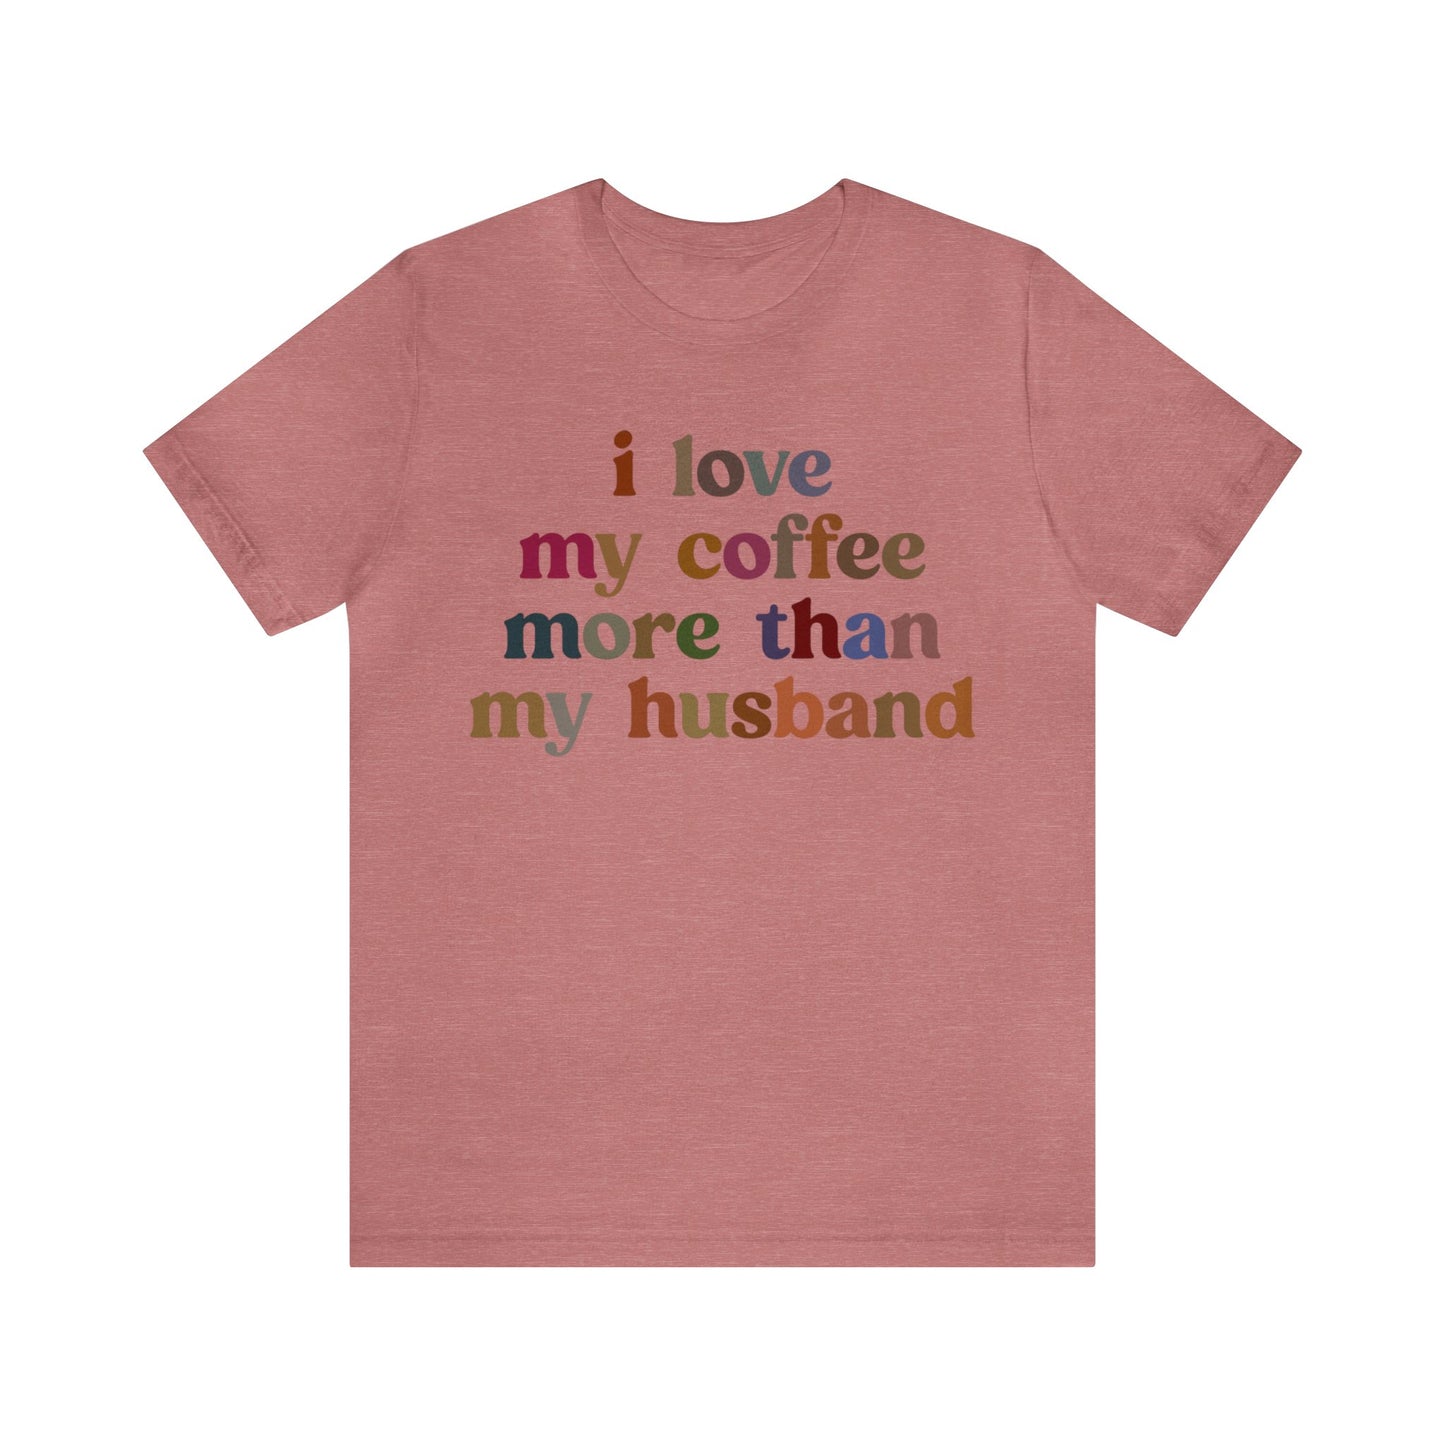 I Love My Coffee More Than My Husband Shirt, Funny Coffee Shirt, Husband Gift, Gift For Husband, Gift for lover Coffee, T1439